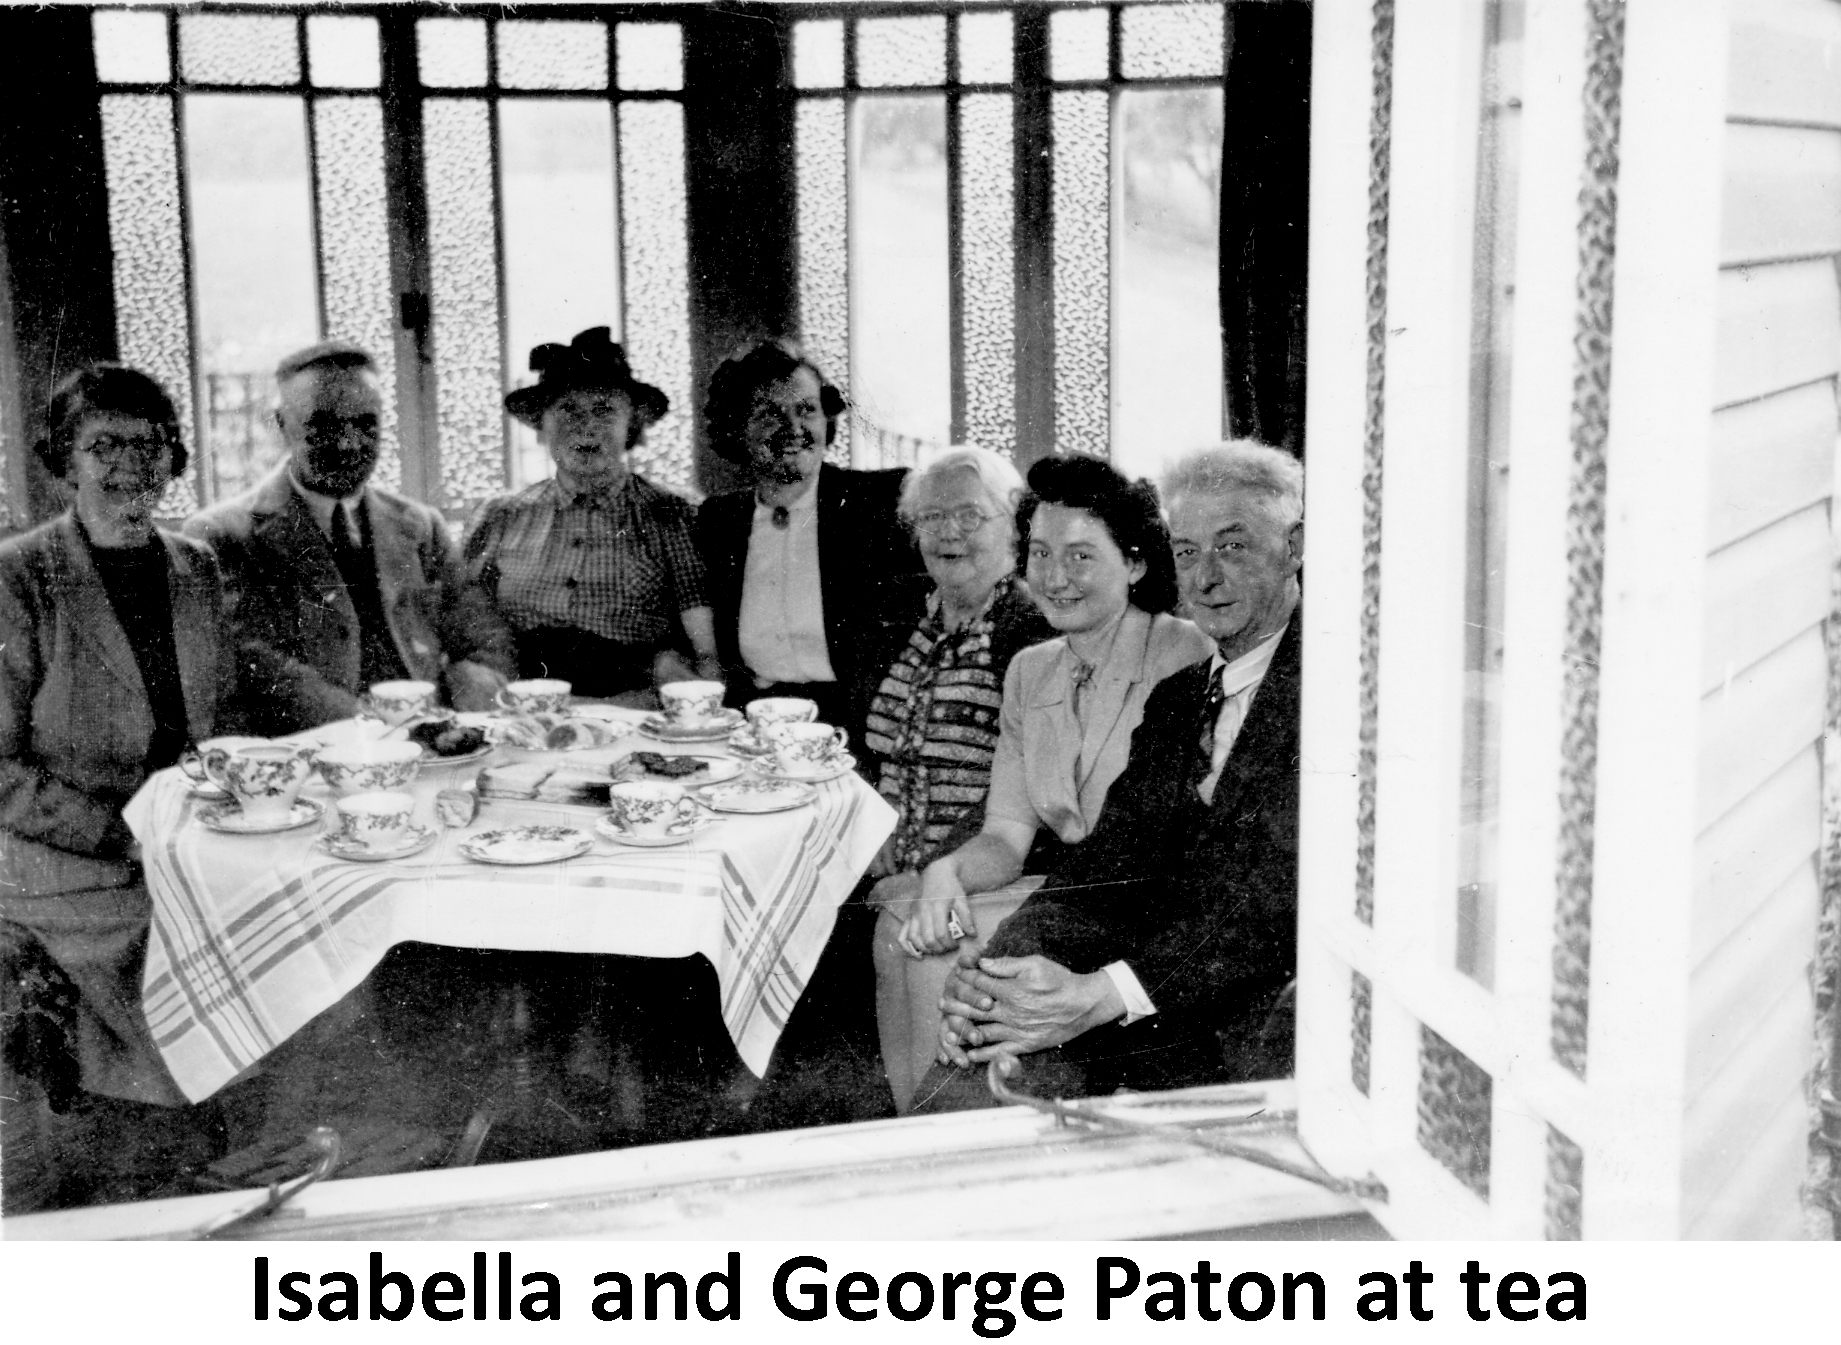 George and Bella Paton at tea  seen through the window of a house